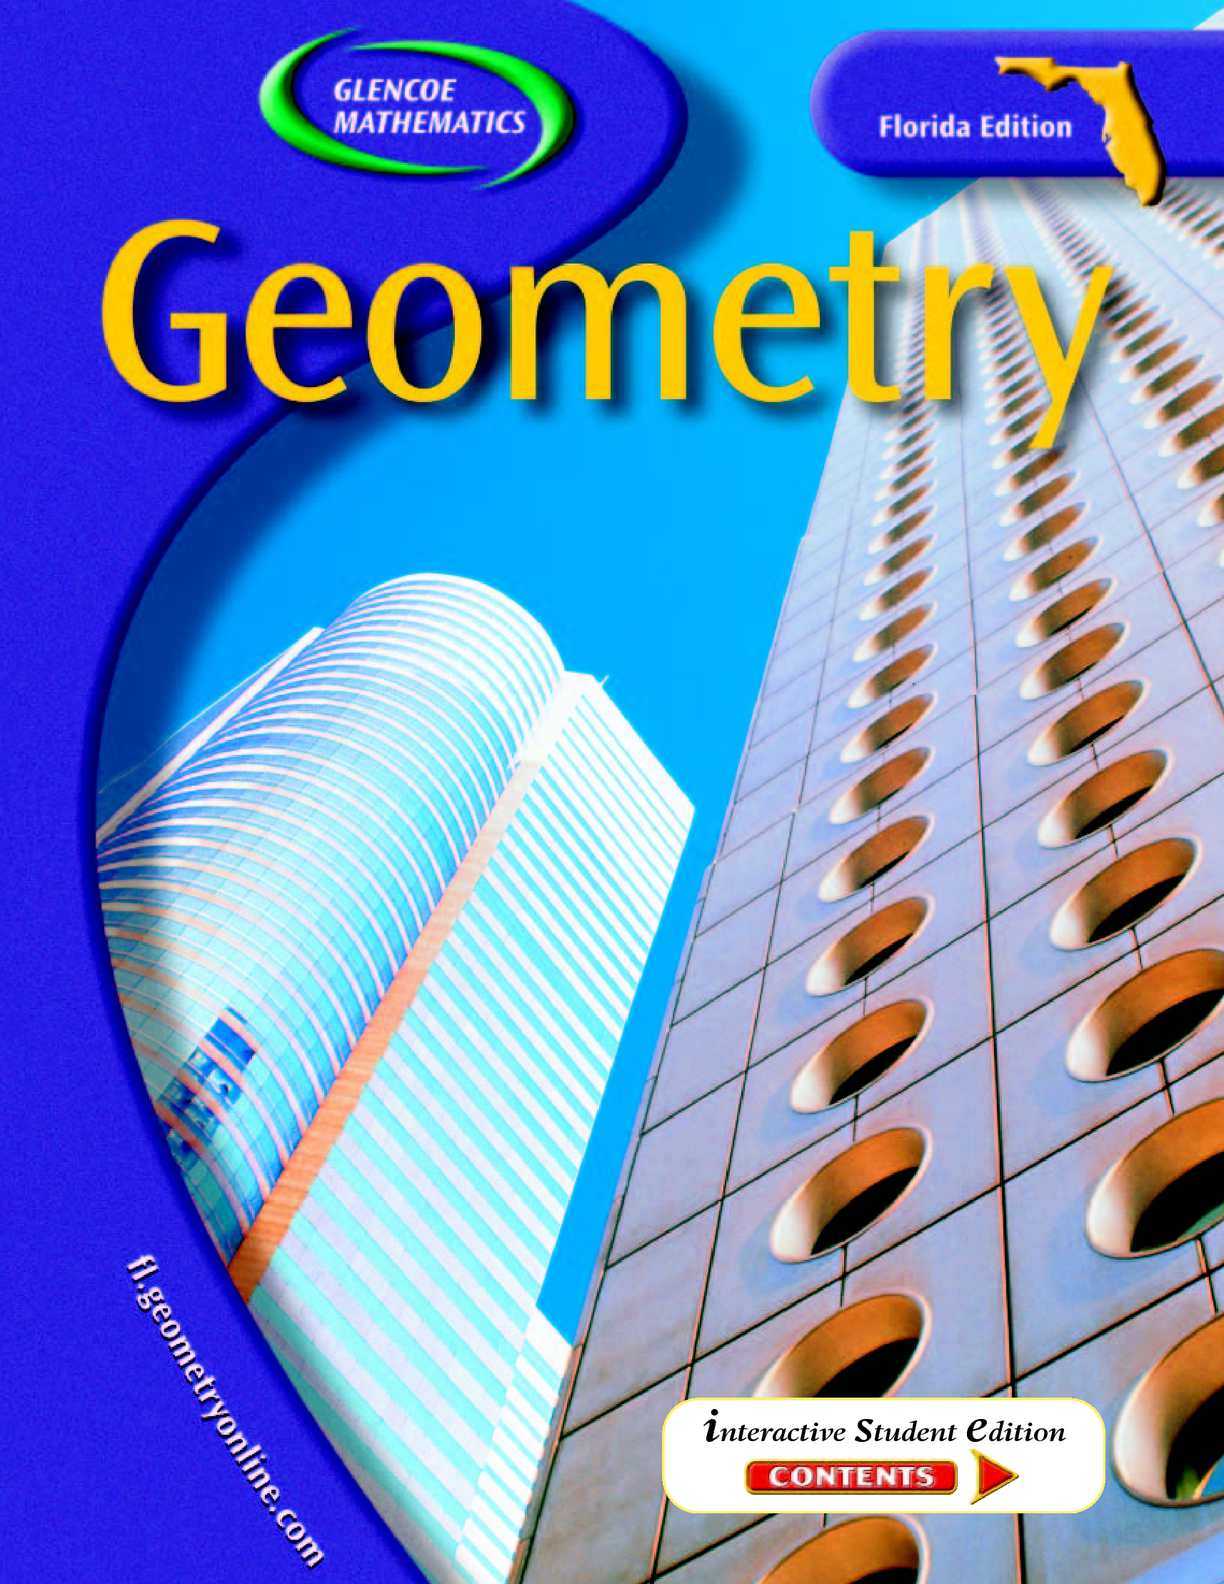 Medians and Centroids Worksheet Answers together with Calaméo Geometry Mcgraw Hill 2004